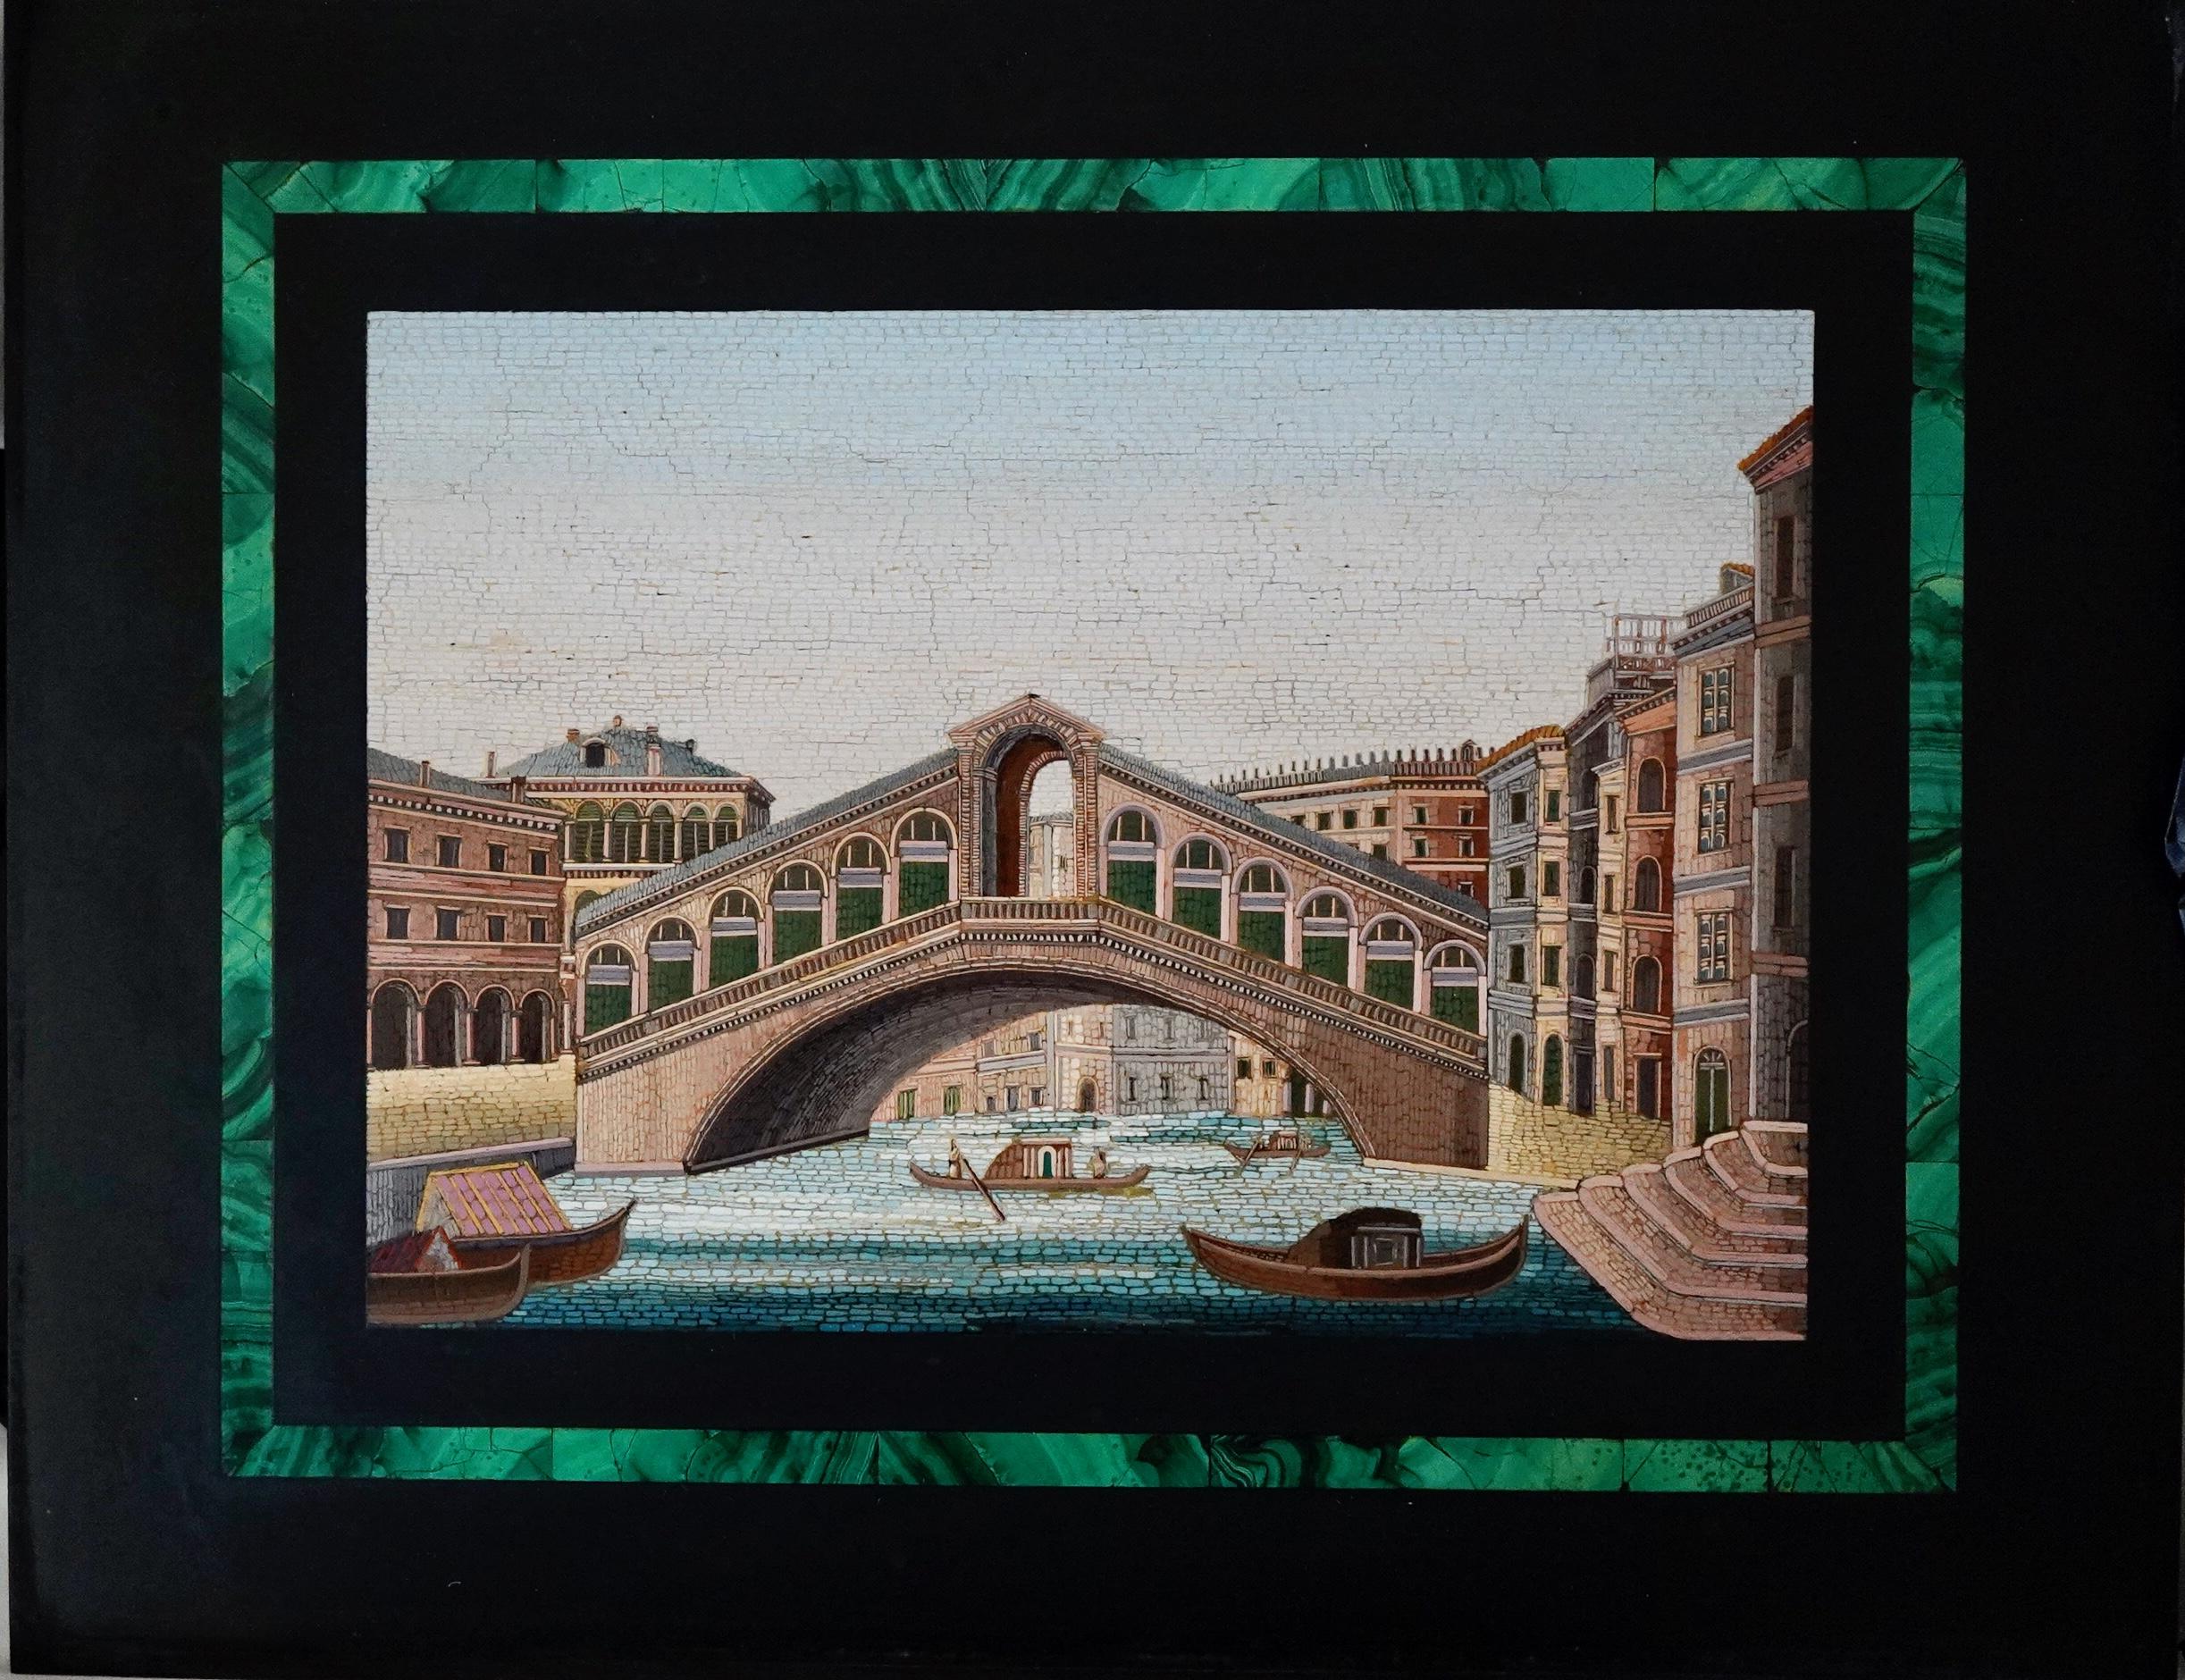 Italian micromosaic pllaque with the view of Rialto bridge in Venice. Veri fine and detailed work. The plaque is unframed. Mosaic itsellf is 6.5 by 9.25 inches, overall 11